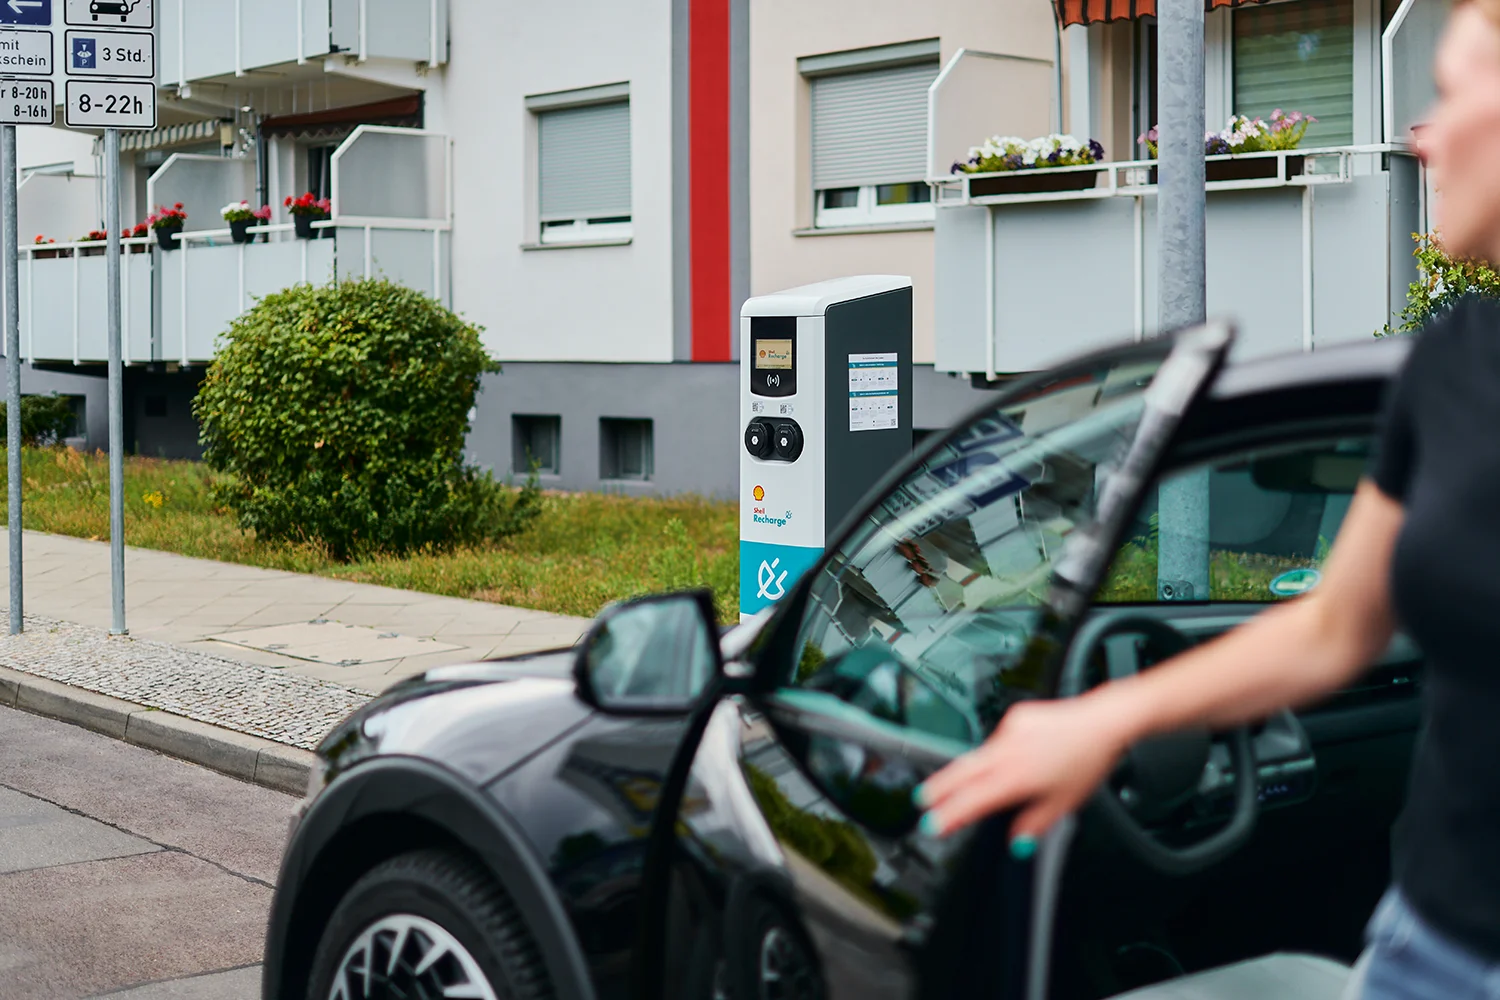 An EV driver is leaving her vehicle to charge at a public Shell Recharge fast charging station using pay-as-you-go, rfid or an emobility app.